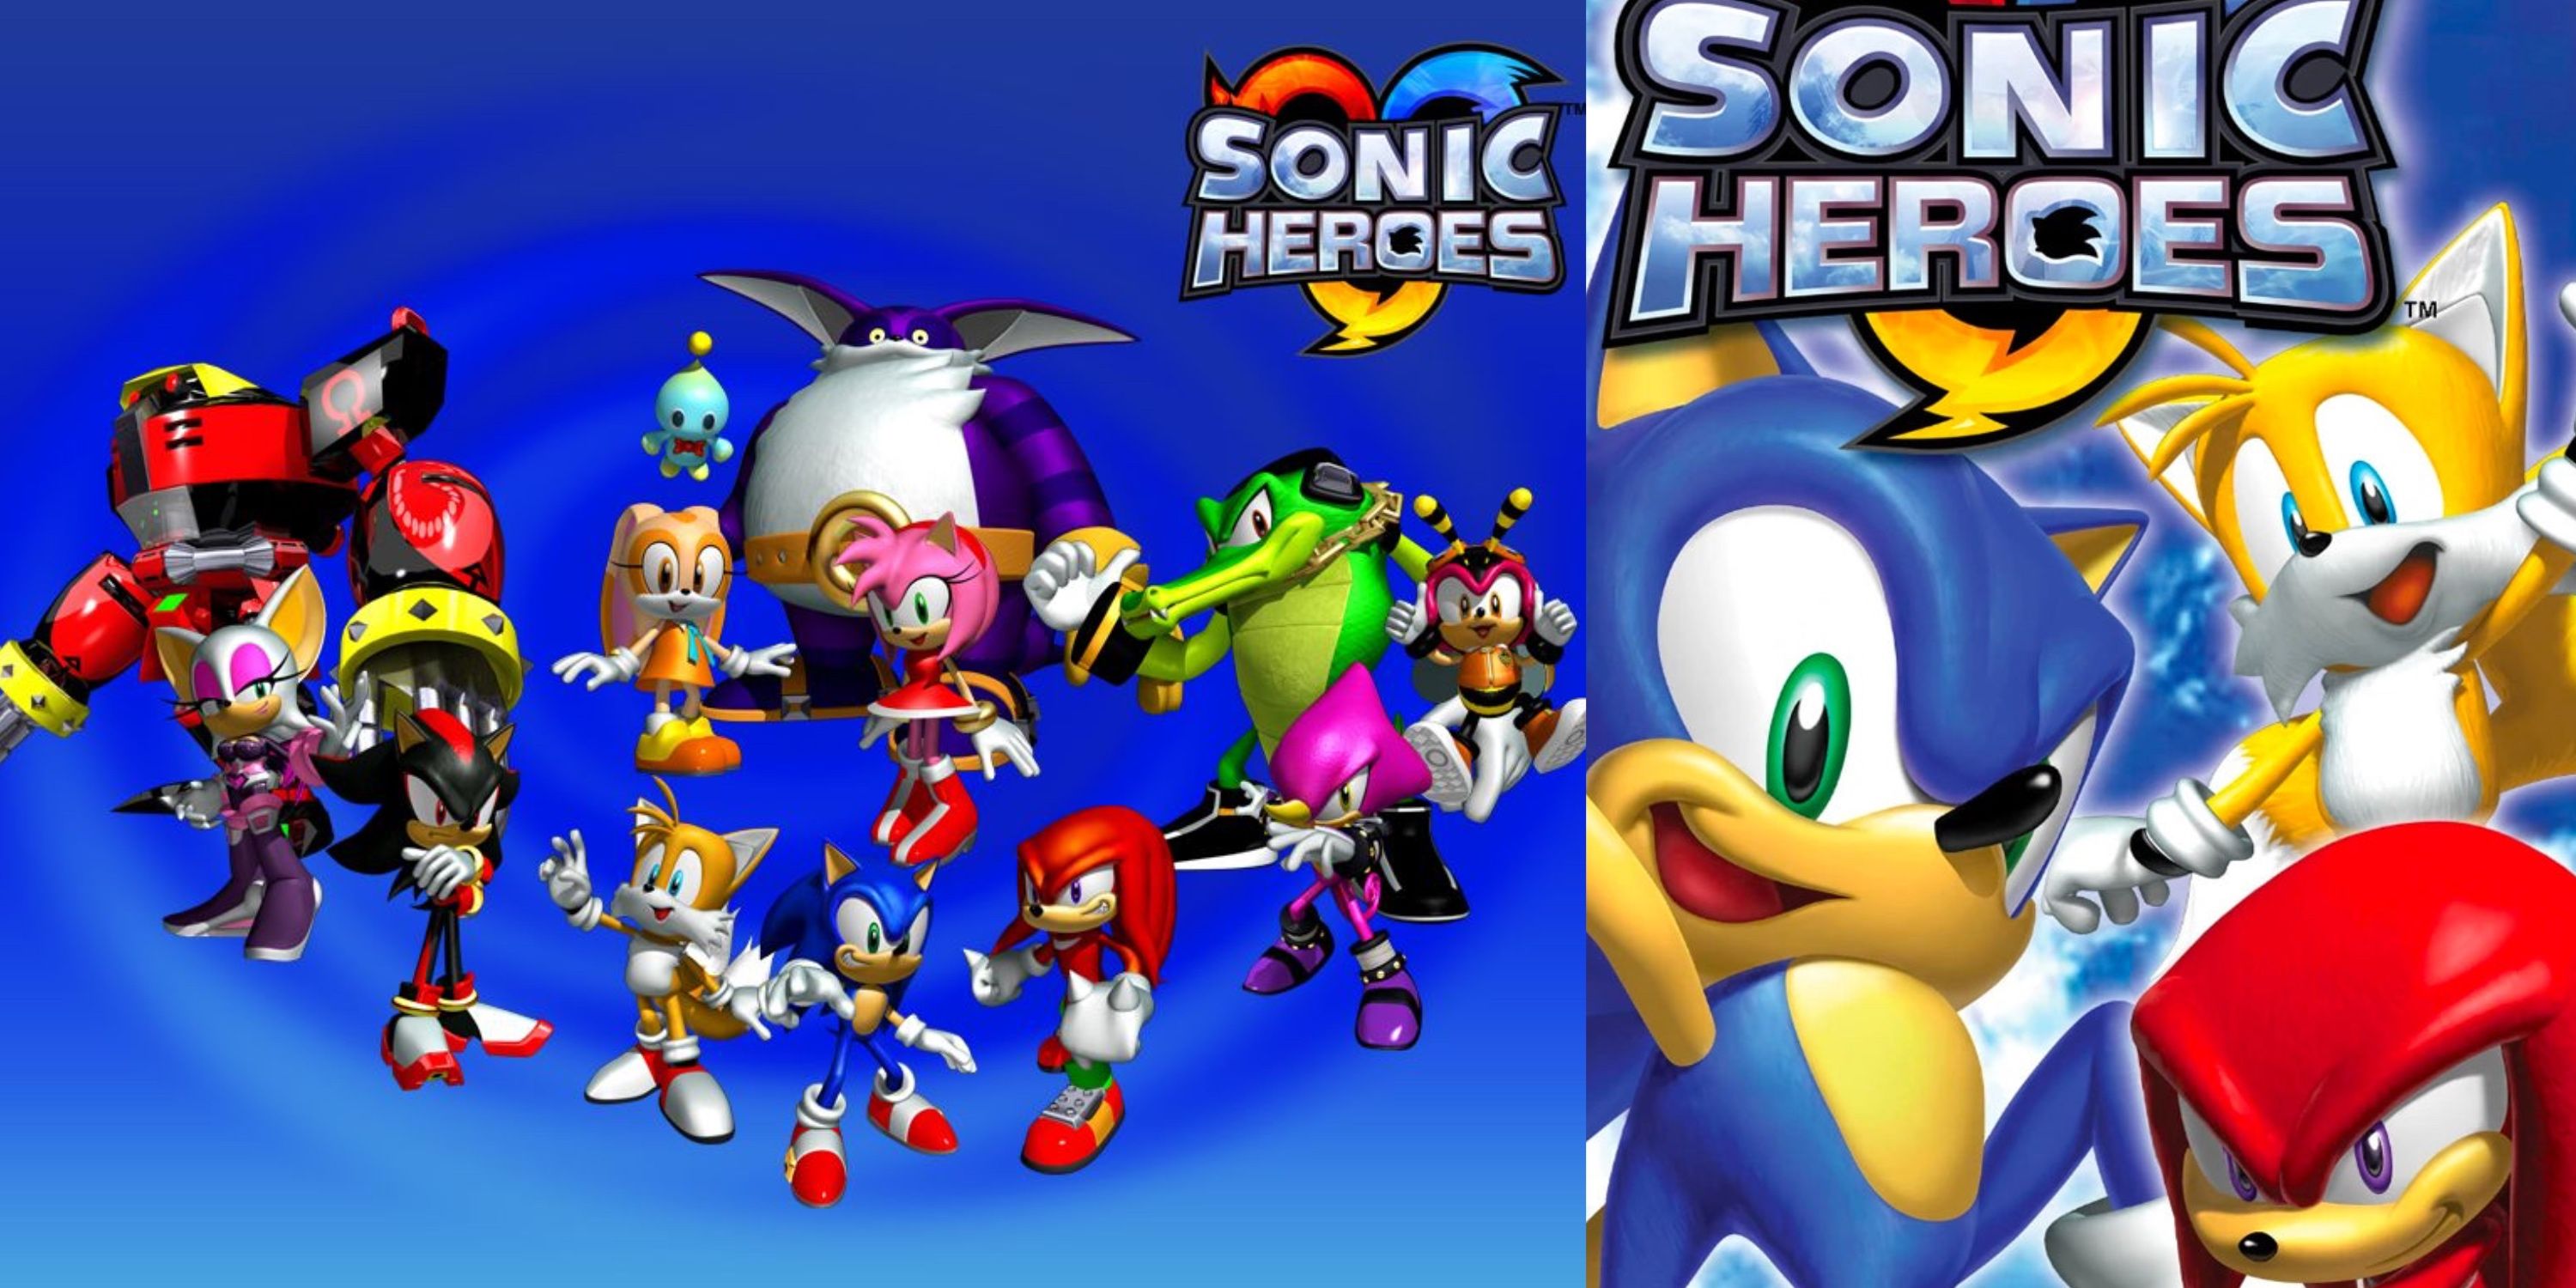 Characters in sonic heroes, plus cover art